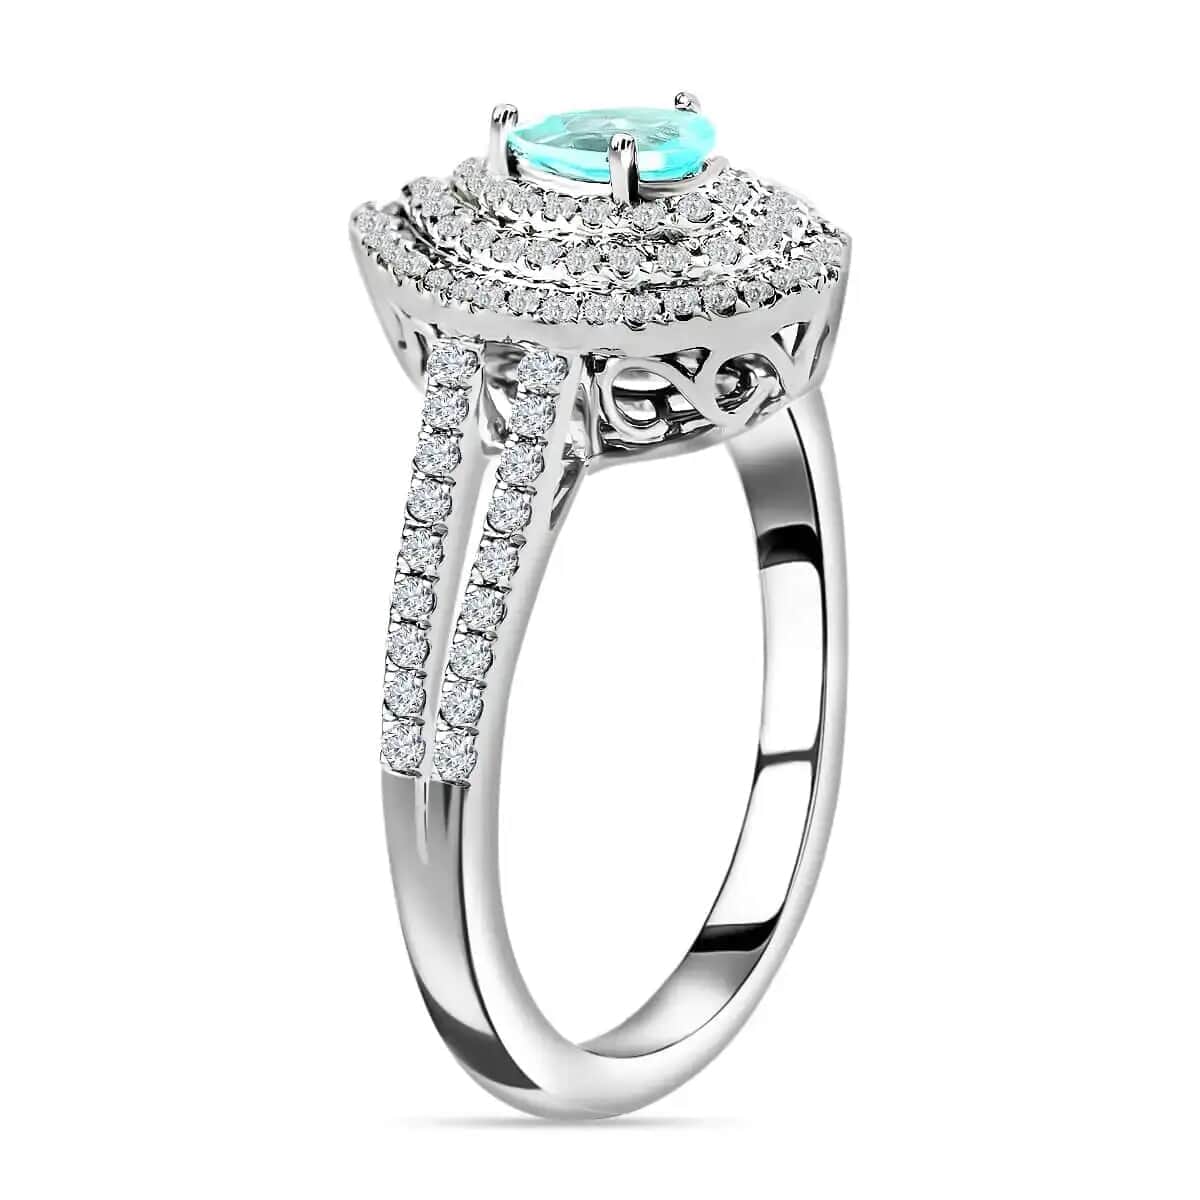 Rhapsody Certified & Appraised AAAA Paraiba Tourmaline Ring,  E-F VS Diamond Accent Double Halo Ring,  950 Platinum Ring, Wedding Ring For Her 5.46 Grams 0.70 ctw image number 3